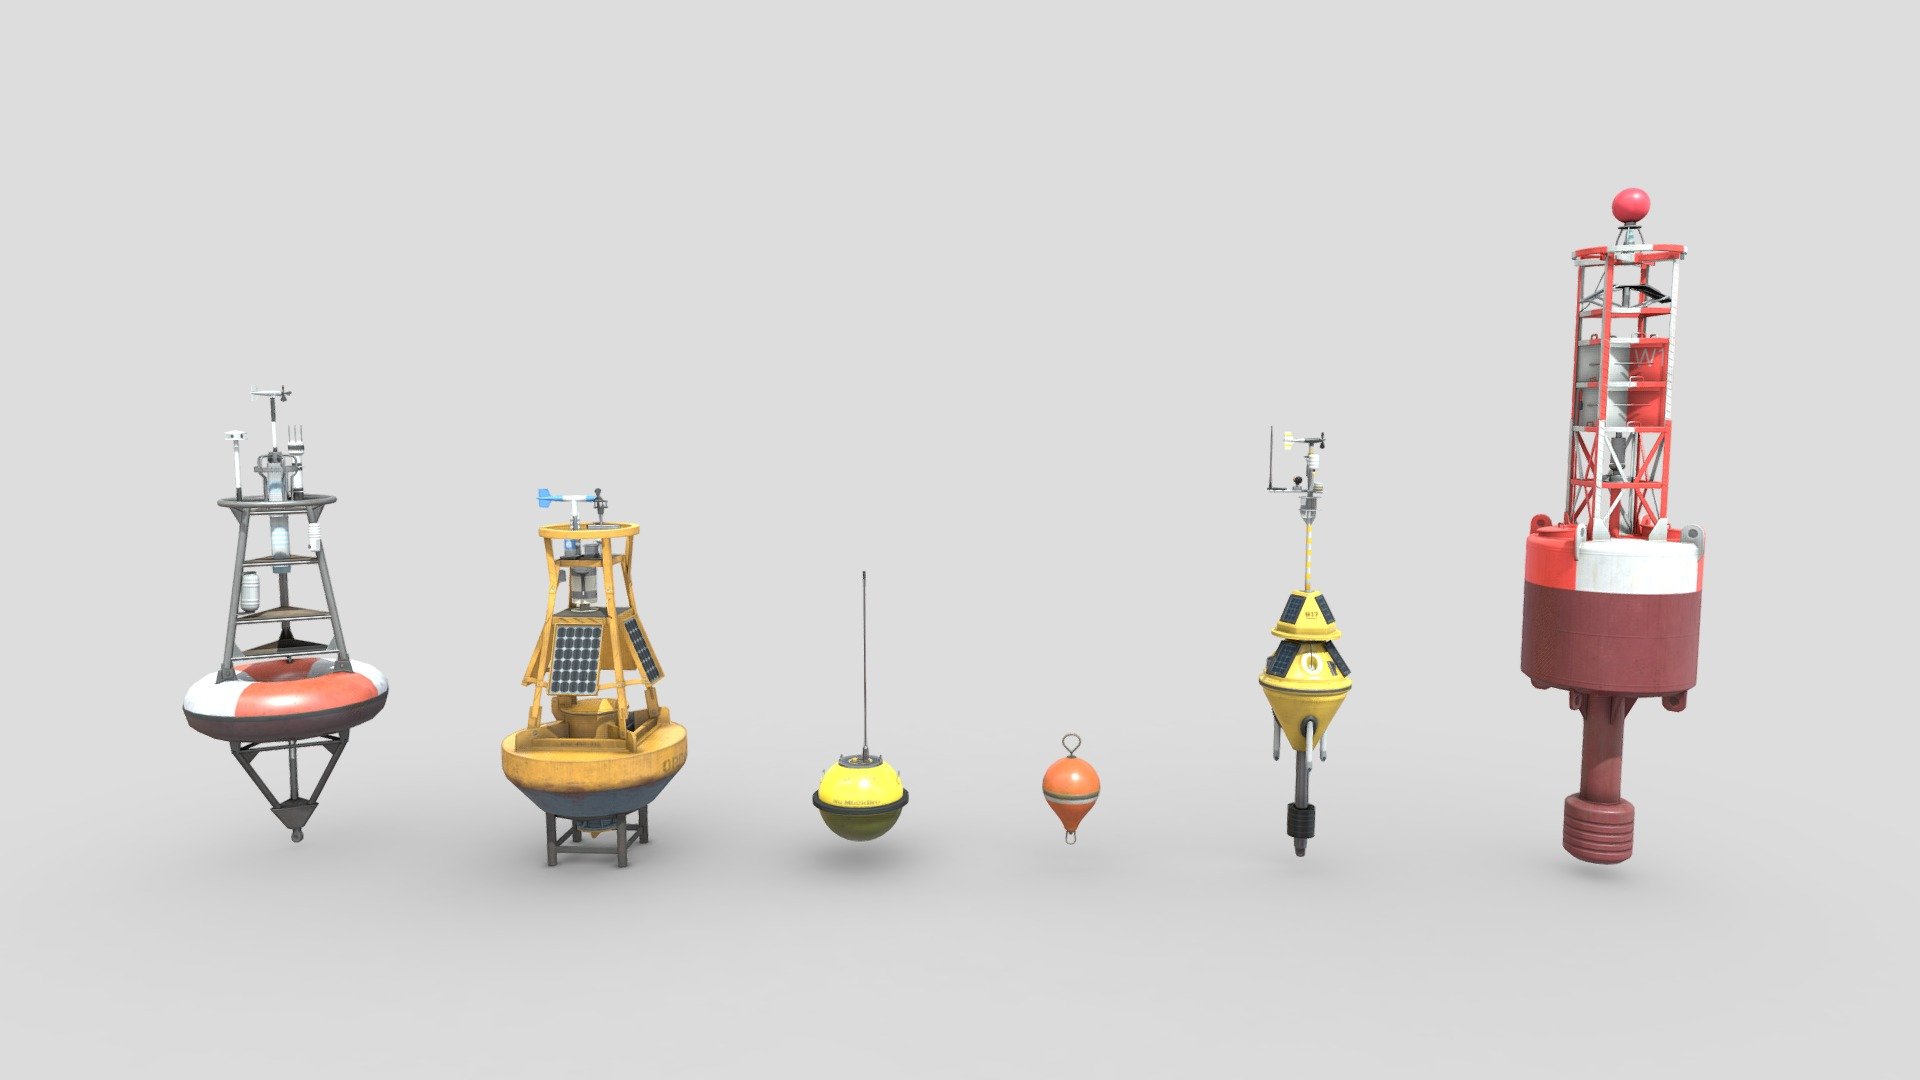 PBR 3D models collection of various types of buoys.

There are 6 low-poly 3D models inside this pack.

Each 3D model has its own collection of PBR textures (Albedo, Metallic, Roughness, Normal, AO).  

Collection includes:


TAO Weather Data Buoy - 4096 Texture Set, 3265 Triangles, 3366 Vertices 
Weather Buoy - 4096 Texture Set, 4478 Triangles, 5058 Vertices  
Wave Measurement Buoy - 4096 PBR Texture Set, 2928 Triangles, 2133 Vertices 
Mooring Buoy - 4096 Texture Set, 1490 Triangles, 1023 Vertices 
Weather Data Buoy - 4096 Texture Set, 4672 Triangles, 4752 Vertices  
Navigation Buoy - 4096 Main &amp; 256 Alpha PBR texture Set, 5728 Triangles, 5660 Vertices  
Lot of additional file formats included (Blender, Unity, Maya etc.)   

More file formats are available in additional zip file on product page.

Please feel free to contact me if you have any questions or need any support for this asset.

Support e-mail: support@rescue3d.com - 6 PBR Buoys Collection - Buy Royalty Free 3D model by Rescue3D Assets (@rescue3d) 3d model